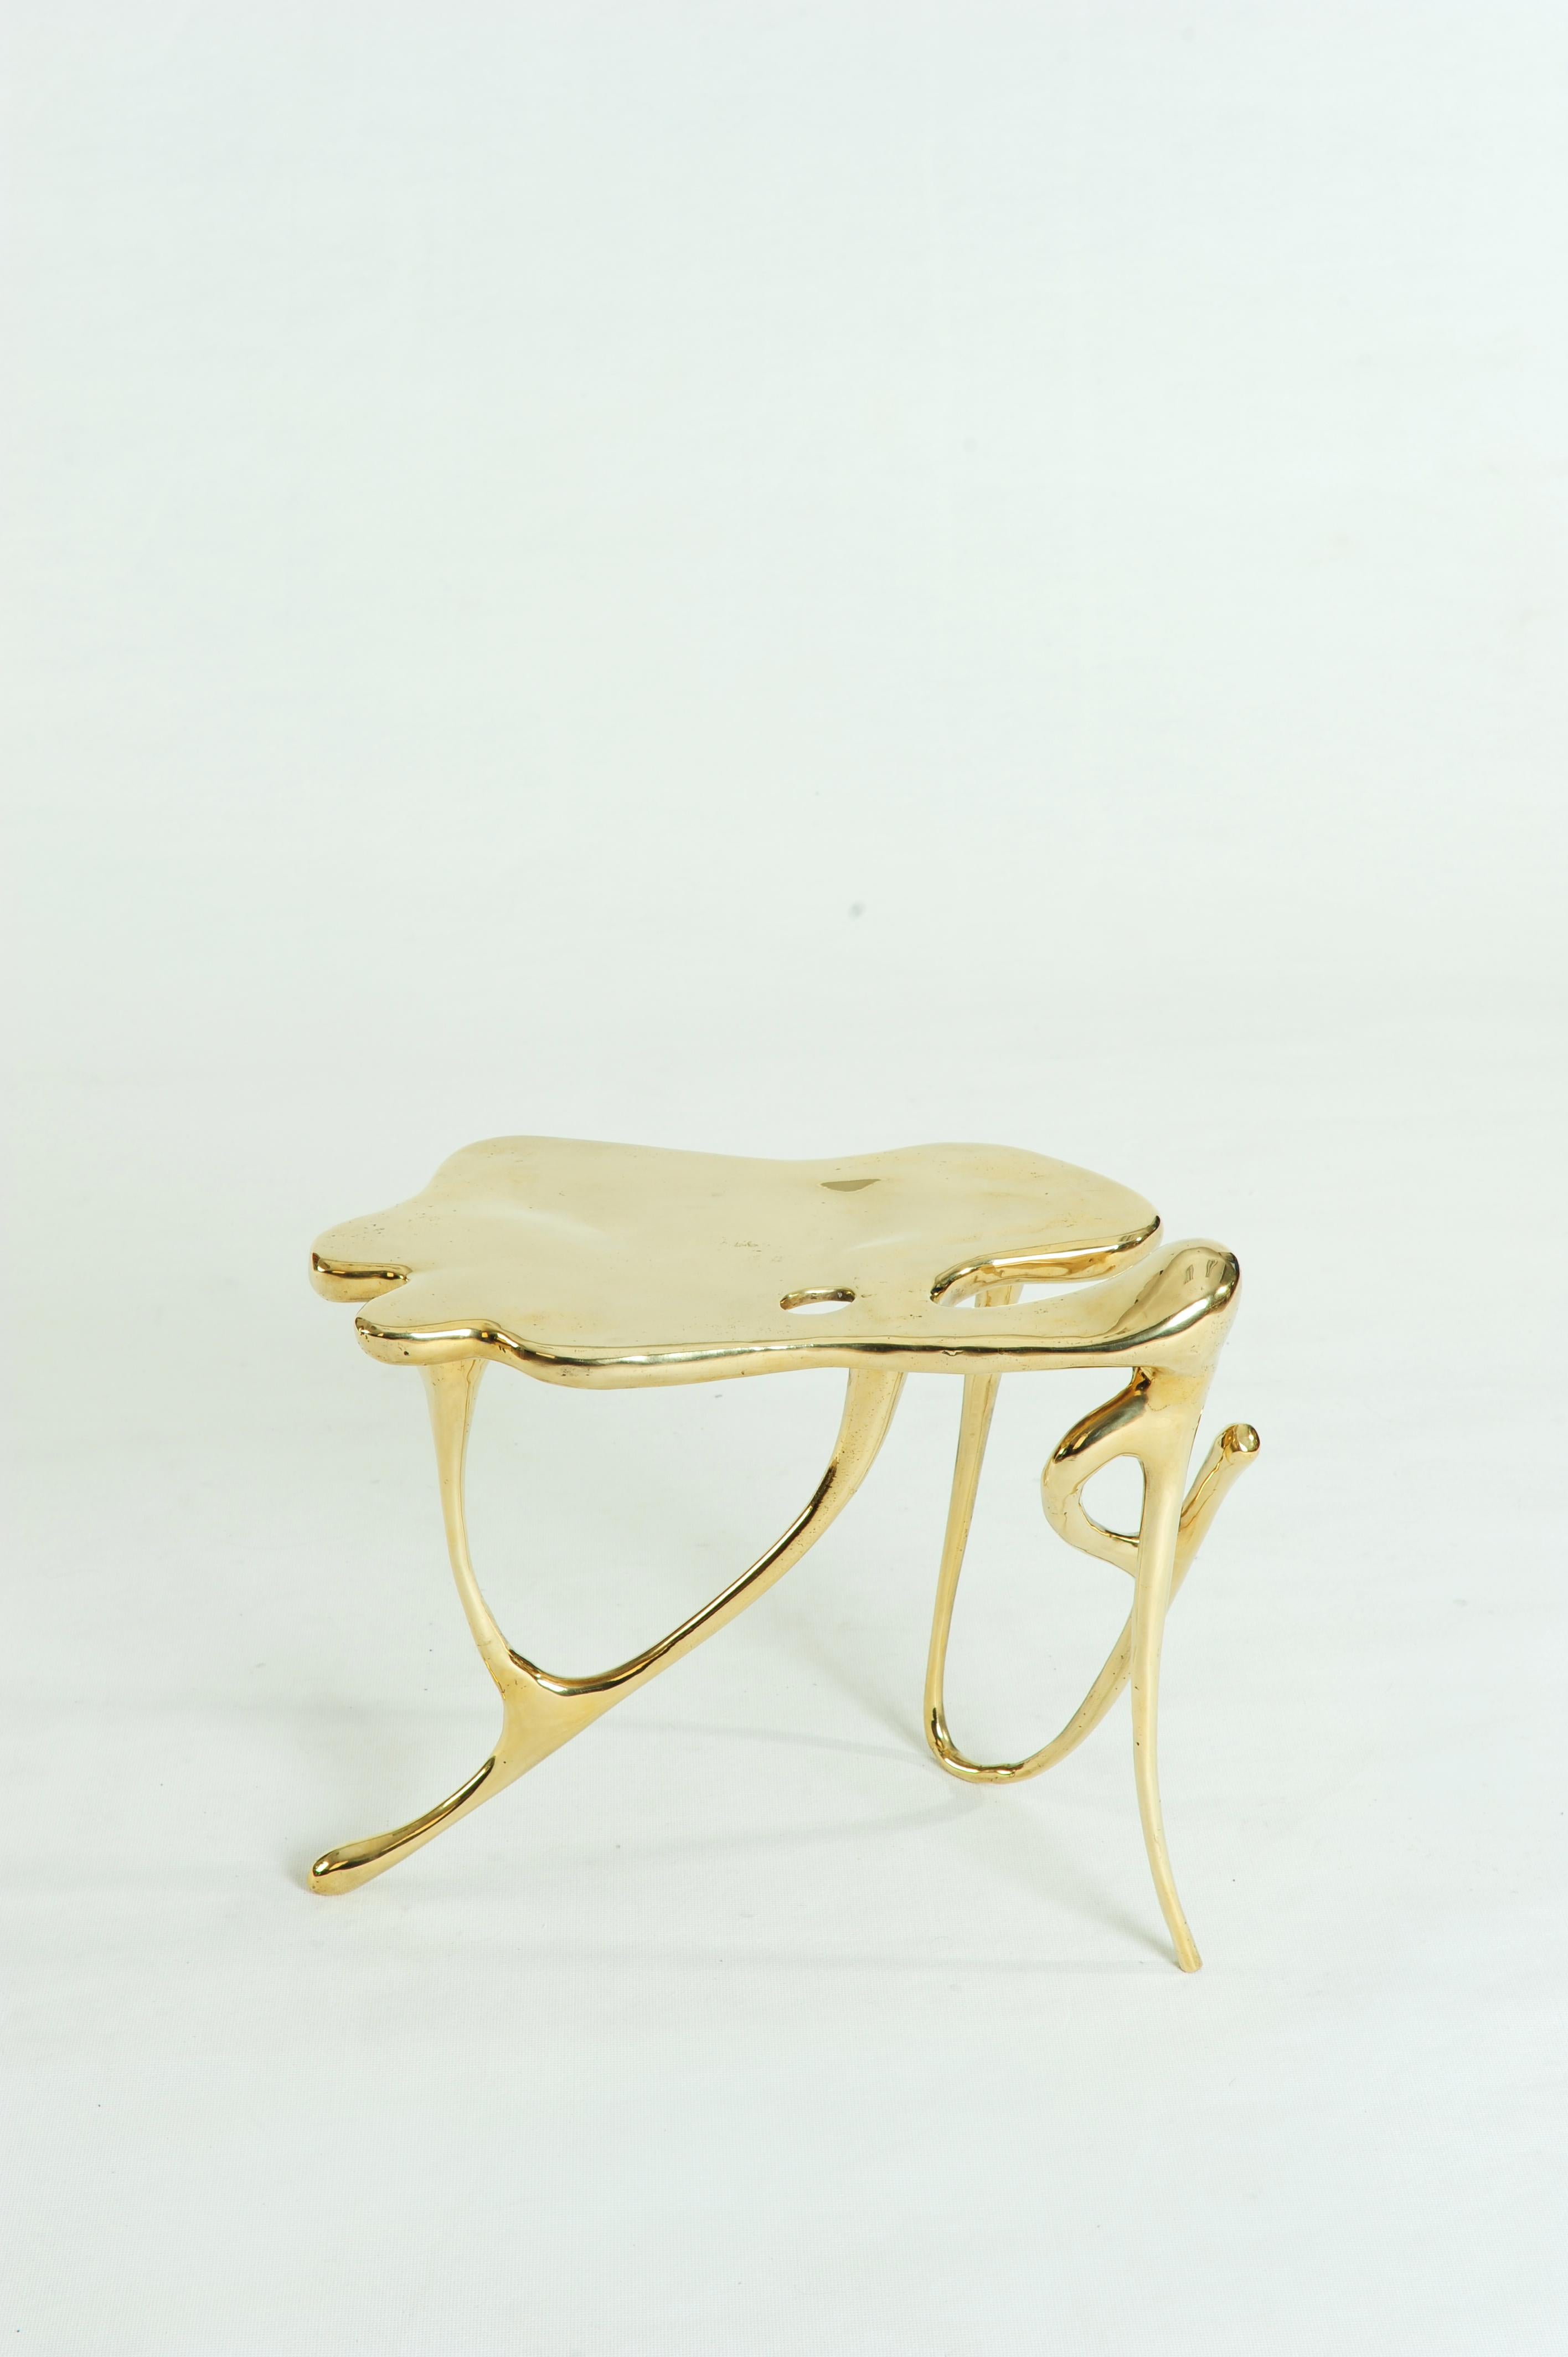 Calligraphic Sculpted Brass Side Table by Misaya 4